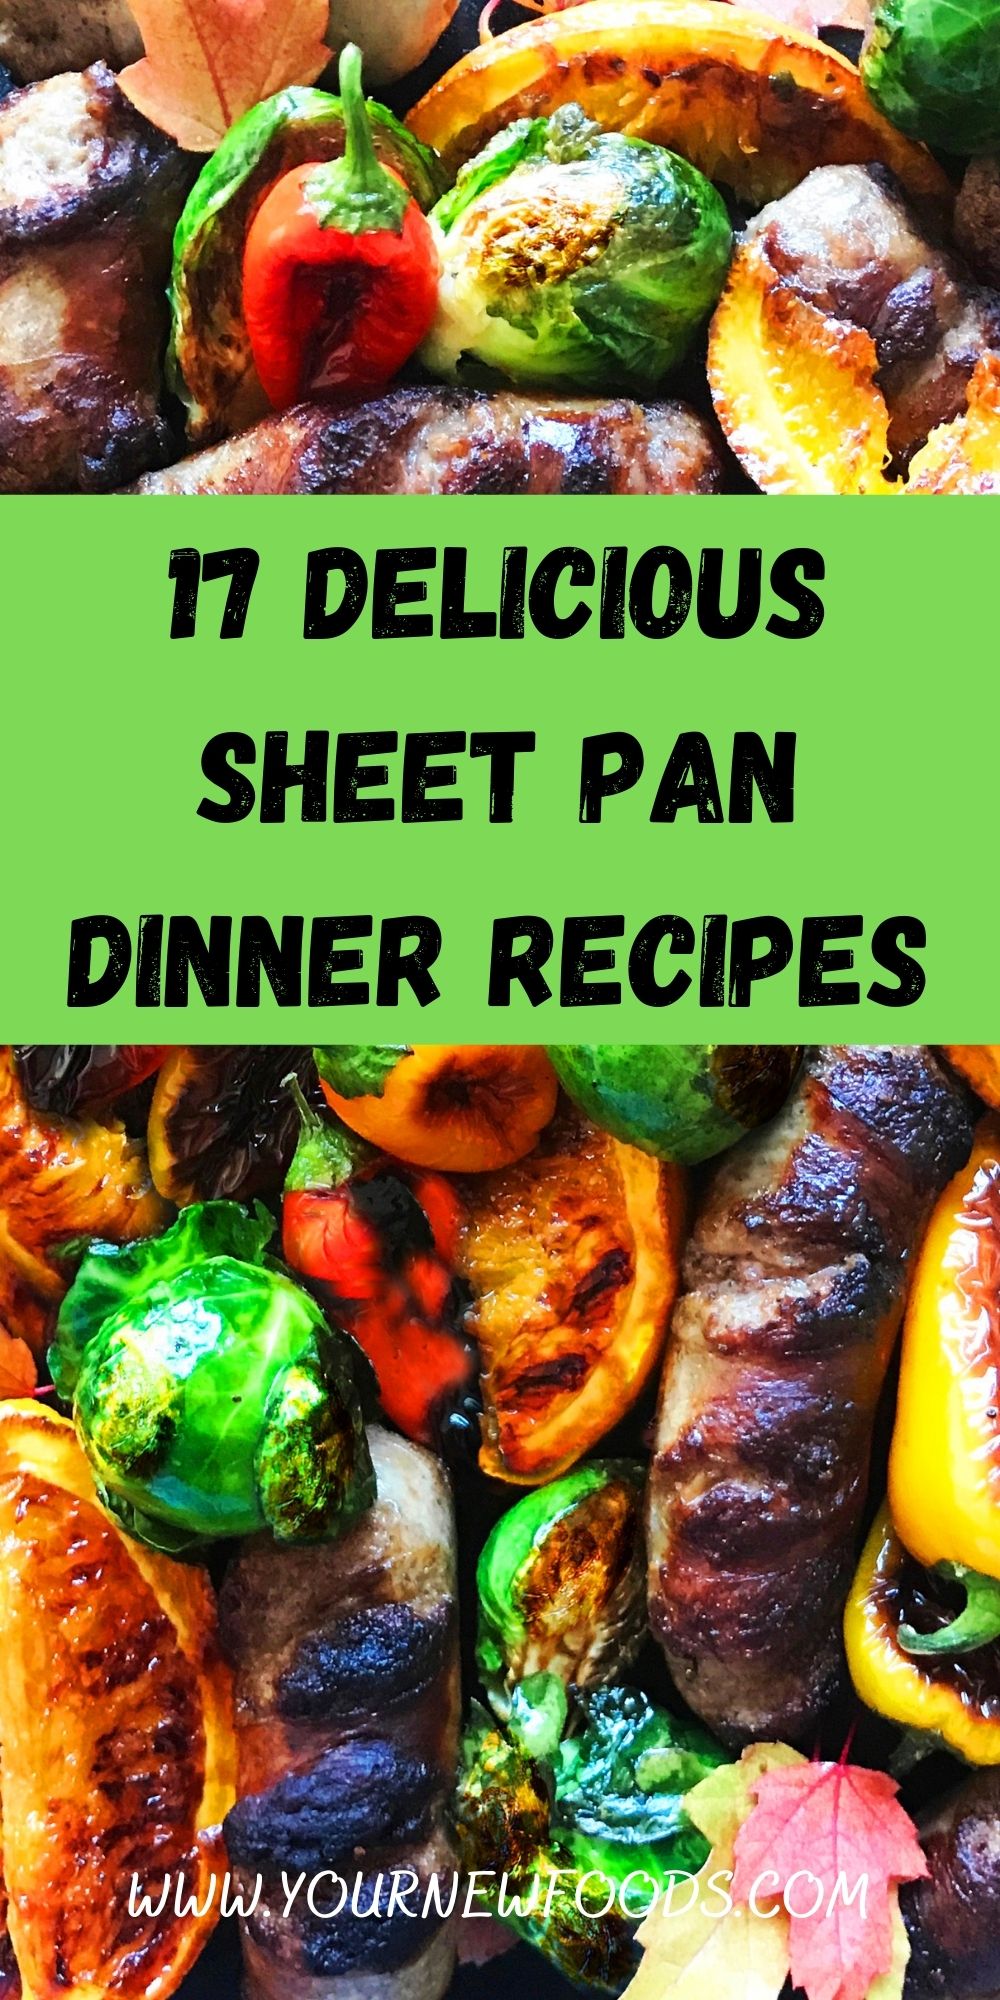 Sheet pan dinner of sausage and vegetables